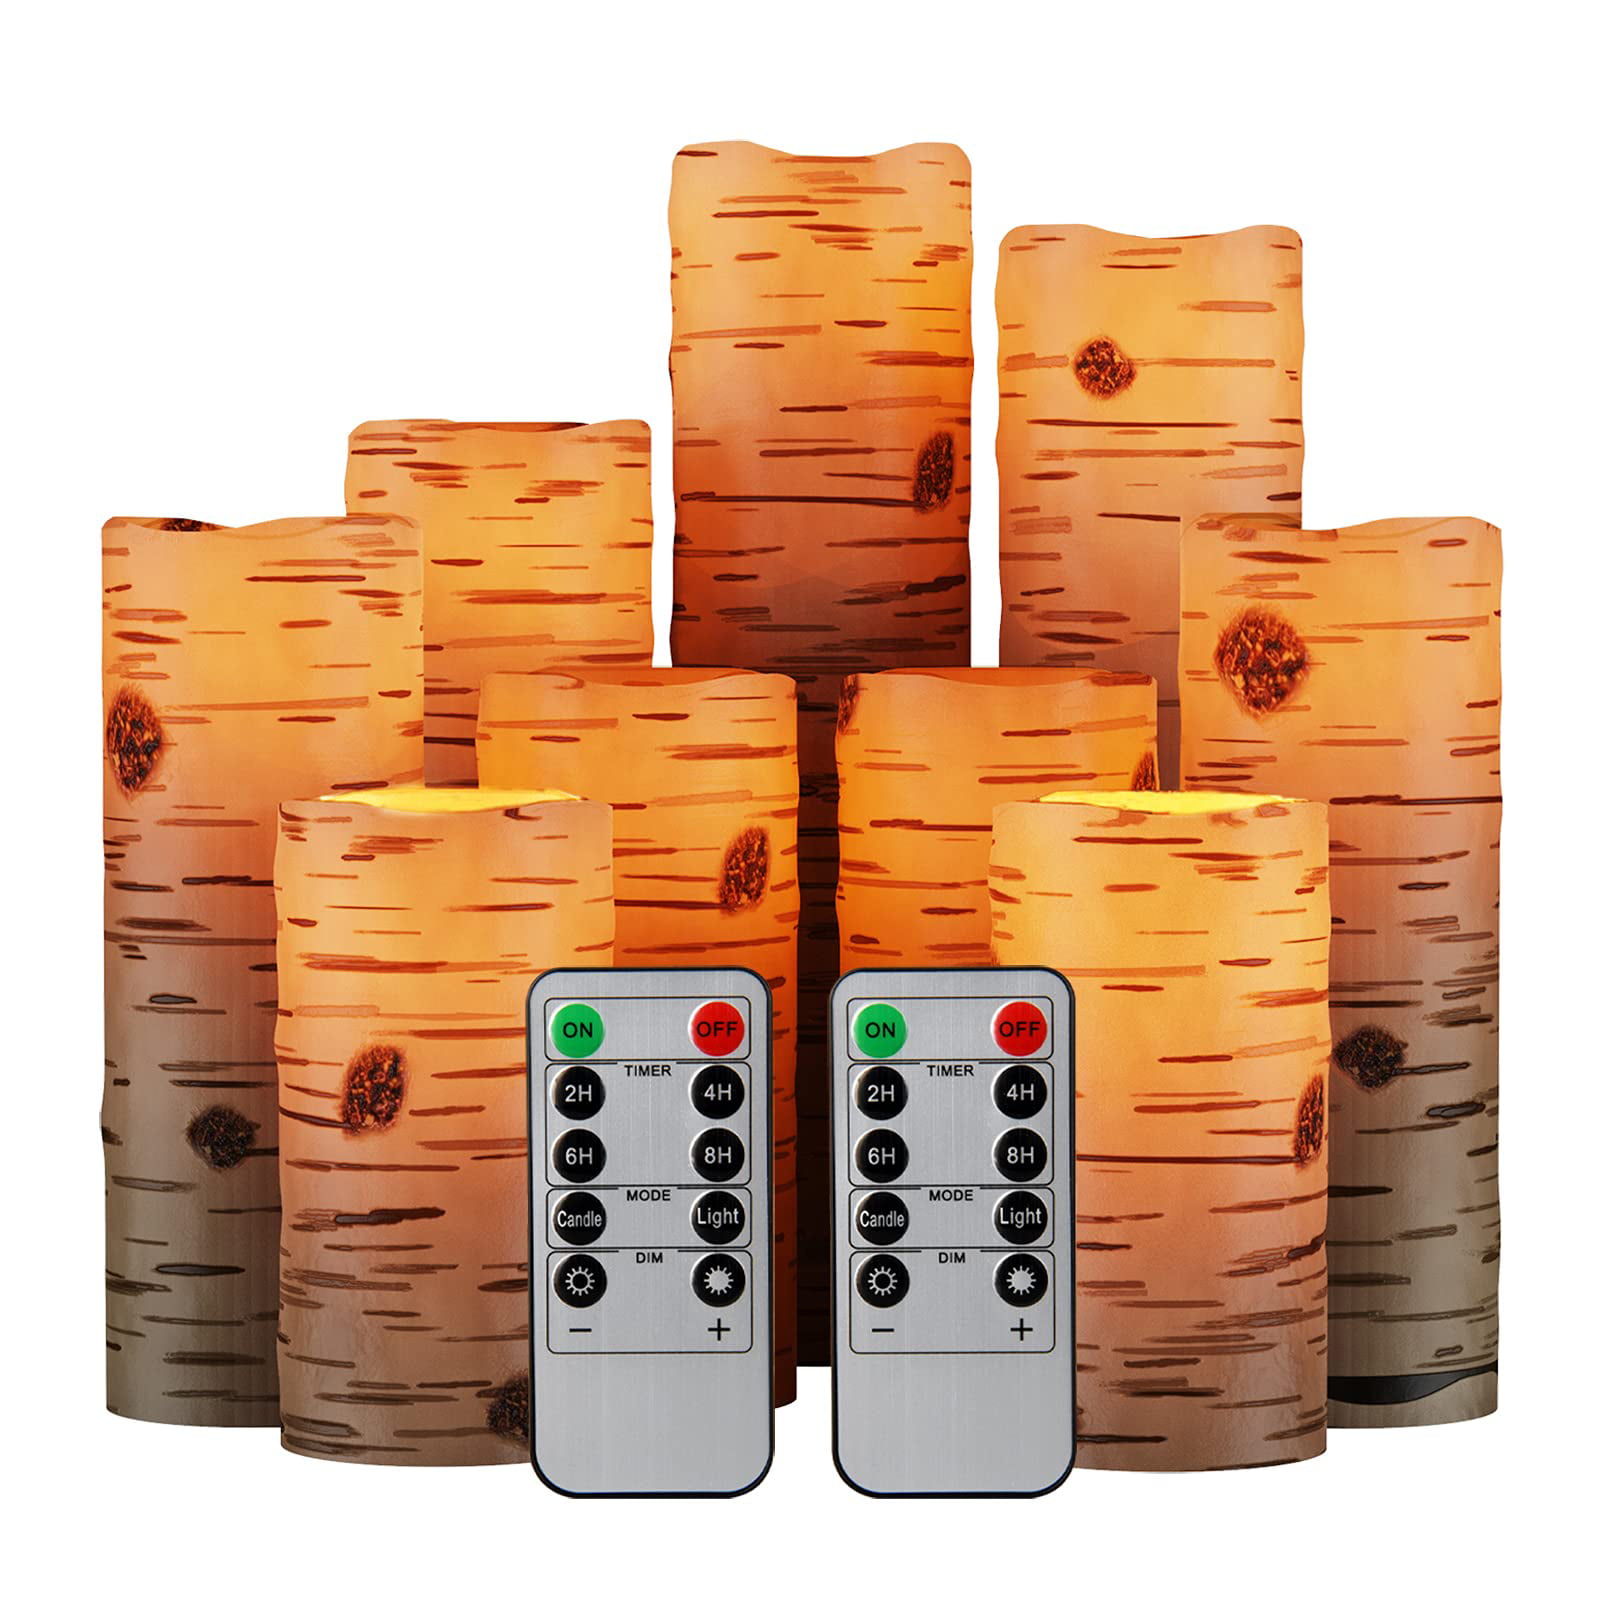 Set of 9 P-01301 Ivory Color Pandaing Flameless Candles Battery Operated LED Pillar Real Wax Flickering Electric Unscented Candles with Remote Control Cycling 24 Hours Timer 